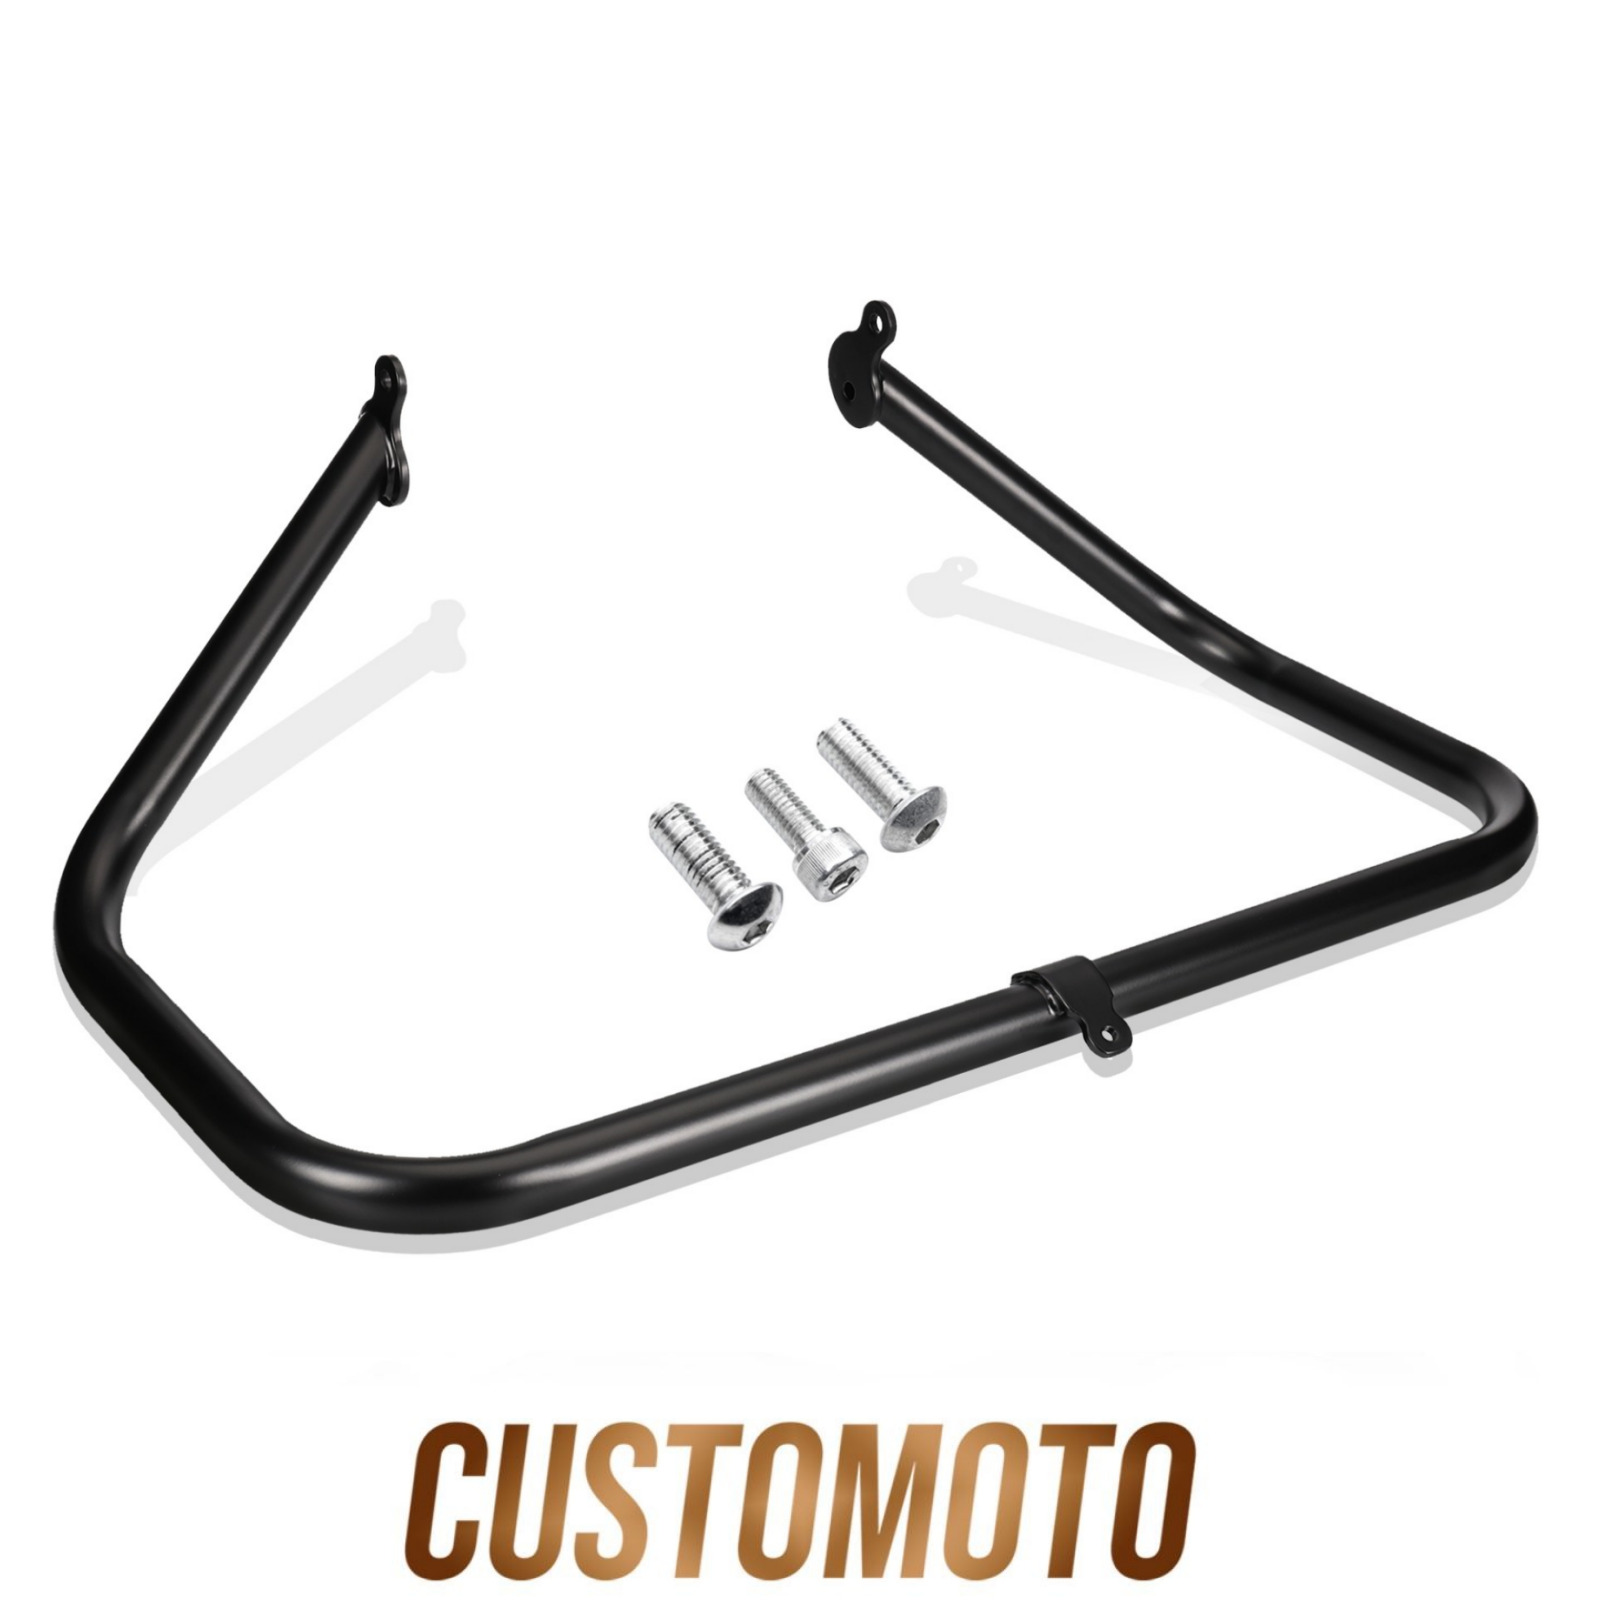 Engine Guard Crash Bar For Harley Touring And Trike Models 2009-later